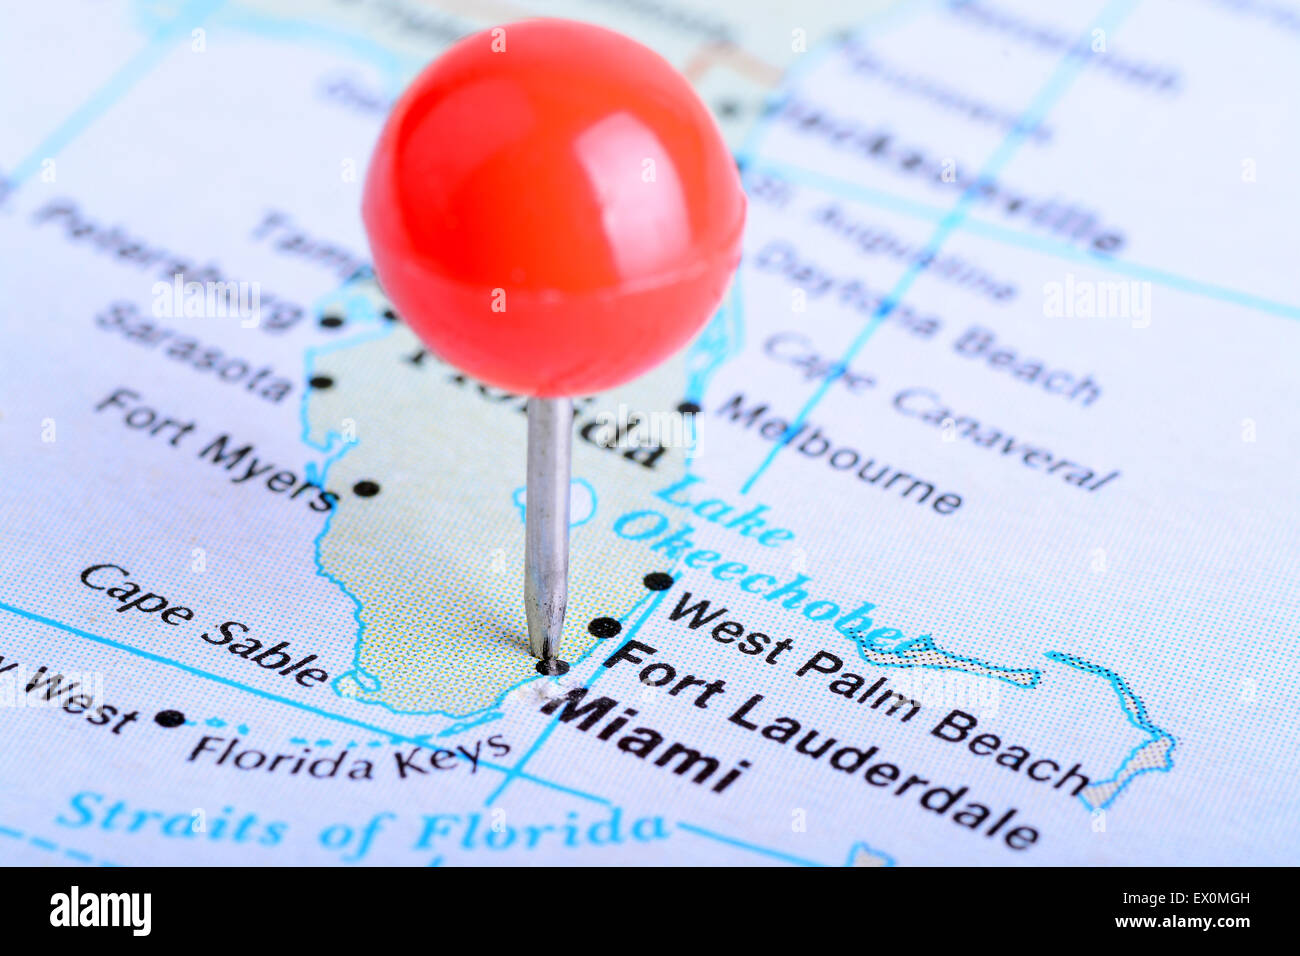 Macro shot of a map showing the city of Miami,Florida Stock Photo